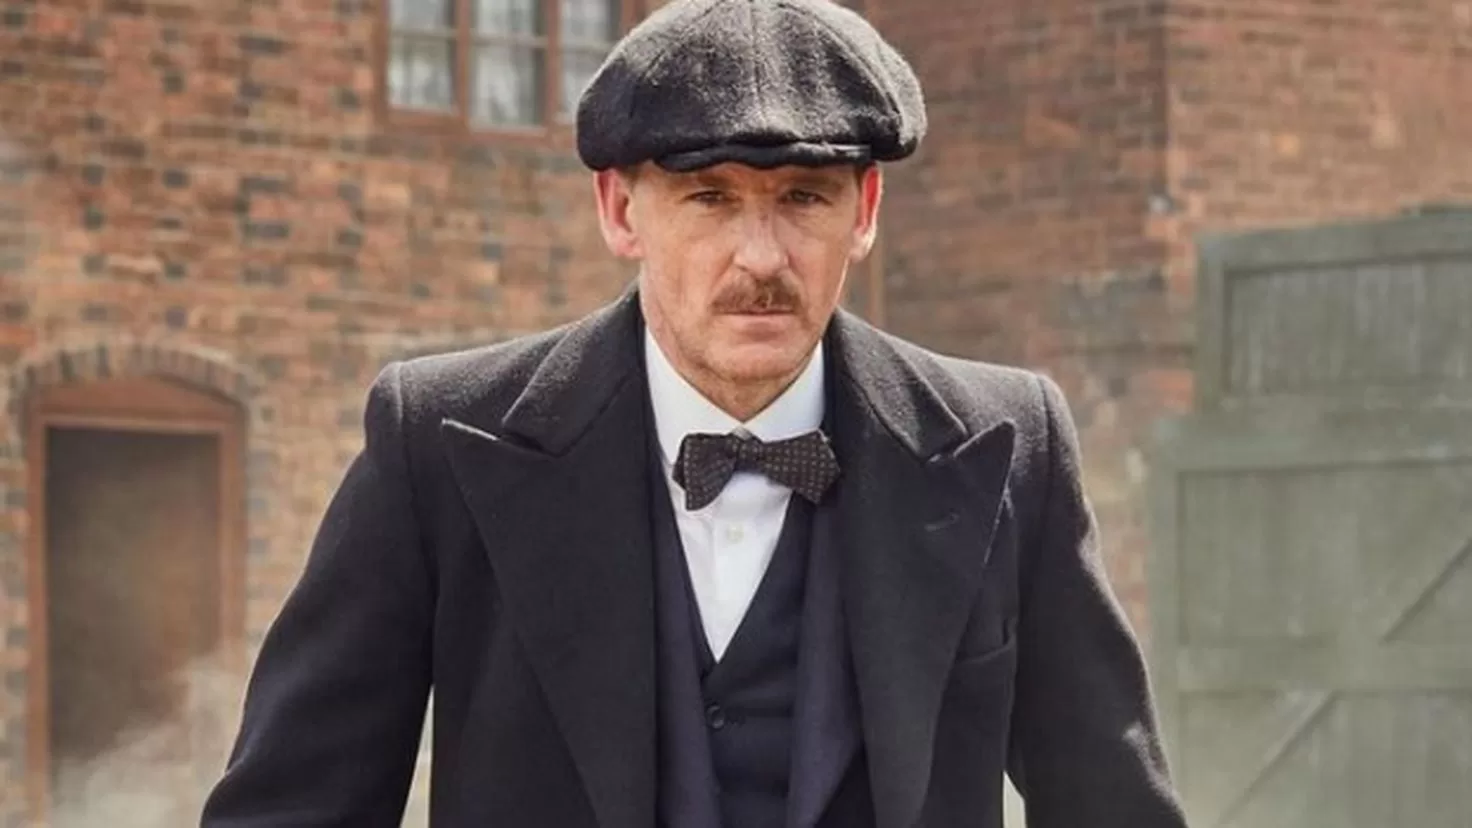 Paul Anderson (Peaky Blinders), convicted of drug possession
